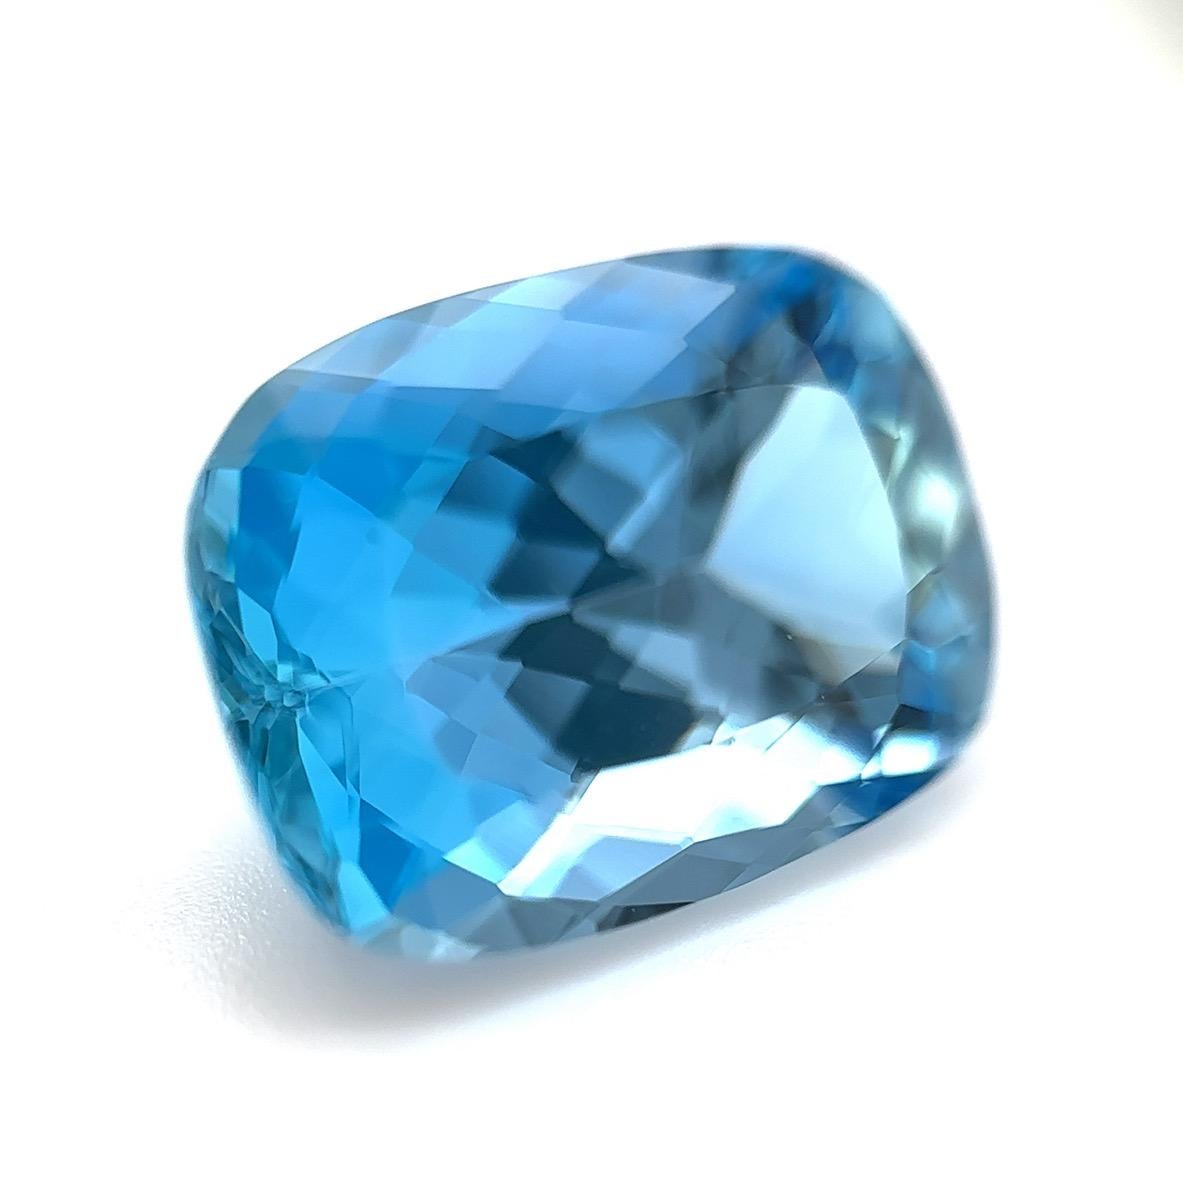 6 Carat super Santa Maria colour aquamarine loose stone(customization option available)

Drenched in the enchanting hues of the clearest tropical waters, this aquamarine exudes an aura of serenity and sophistication. Its flawless clarity and